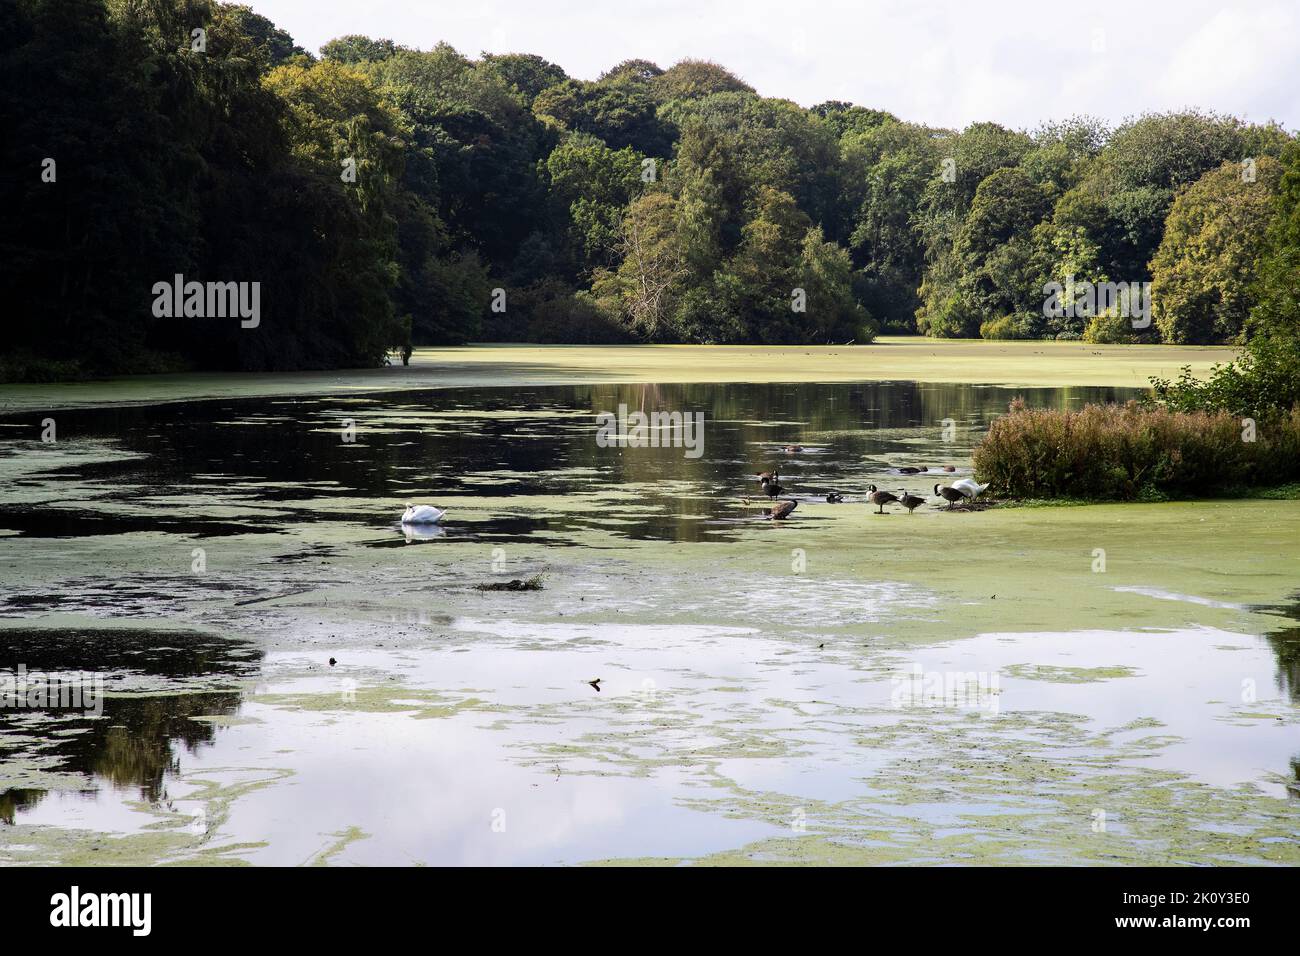 Mute Swans (Cygnus olor) and Canada Geese (Branta canadensis) on the Upper Lake covered in algae bloom  at the Yorkshire Sculpture Park, Wakefield. Stock Photo